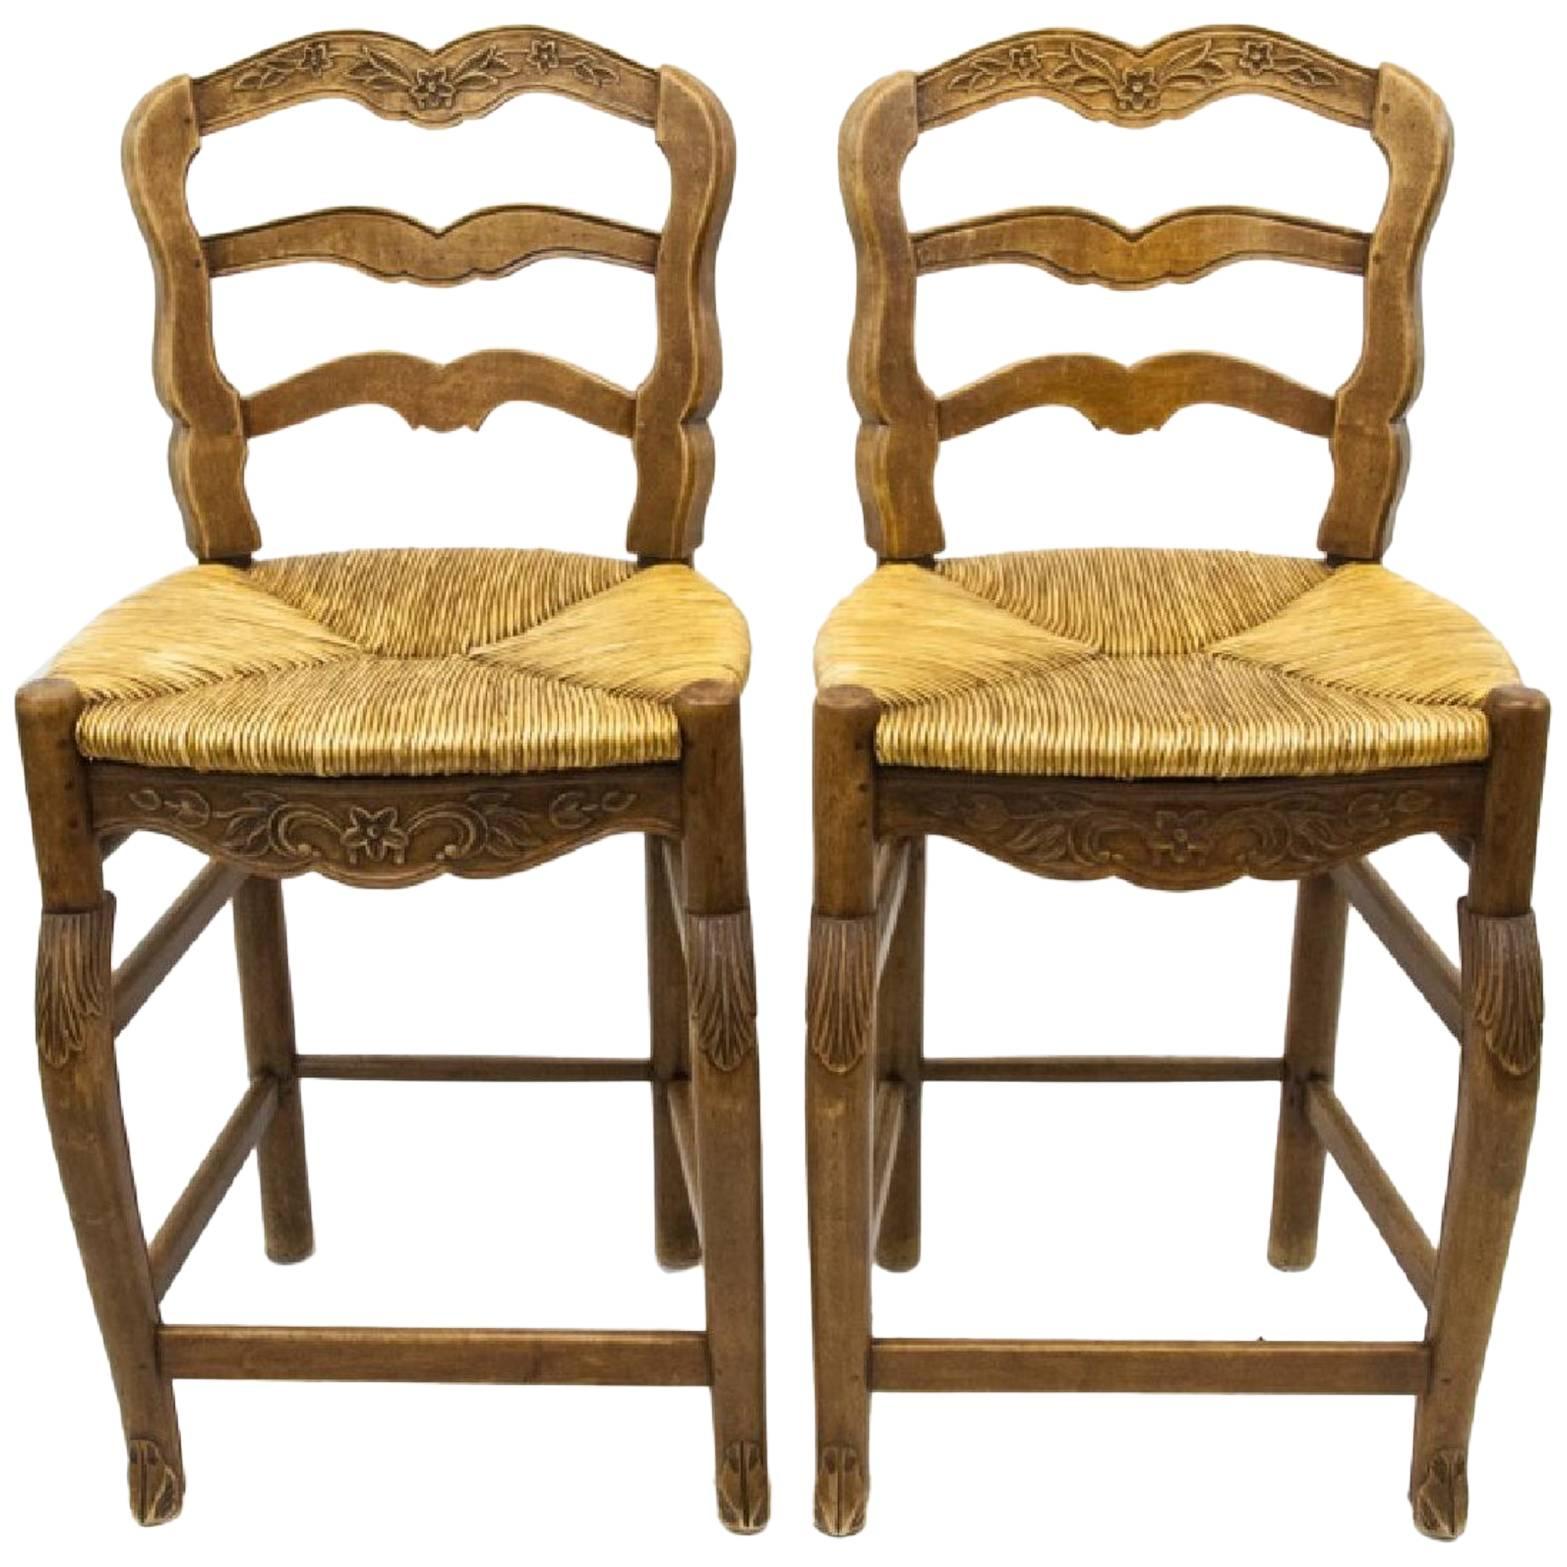 Pair of French Country Ladder Back Bar Stools